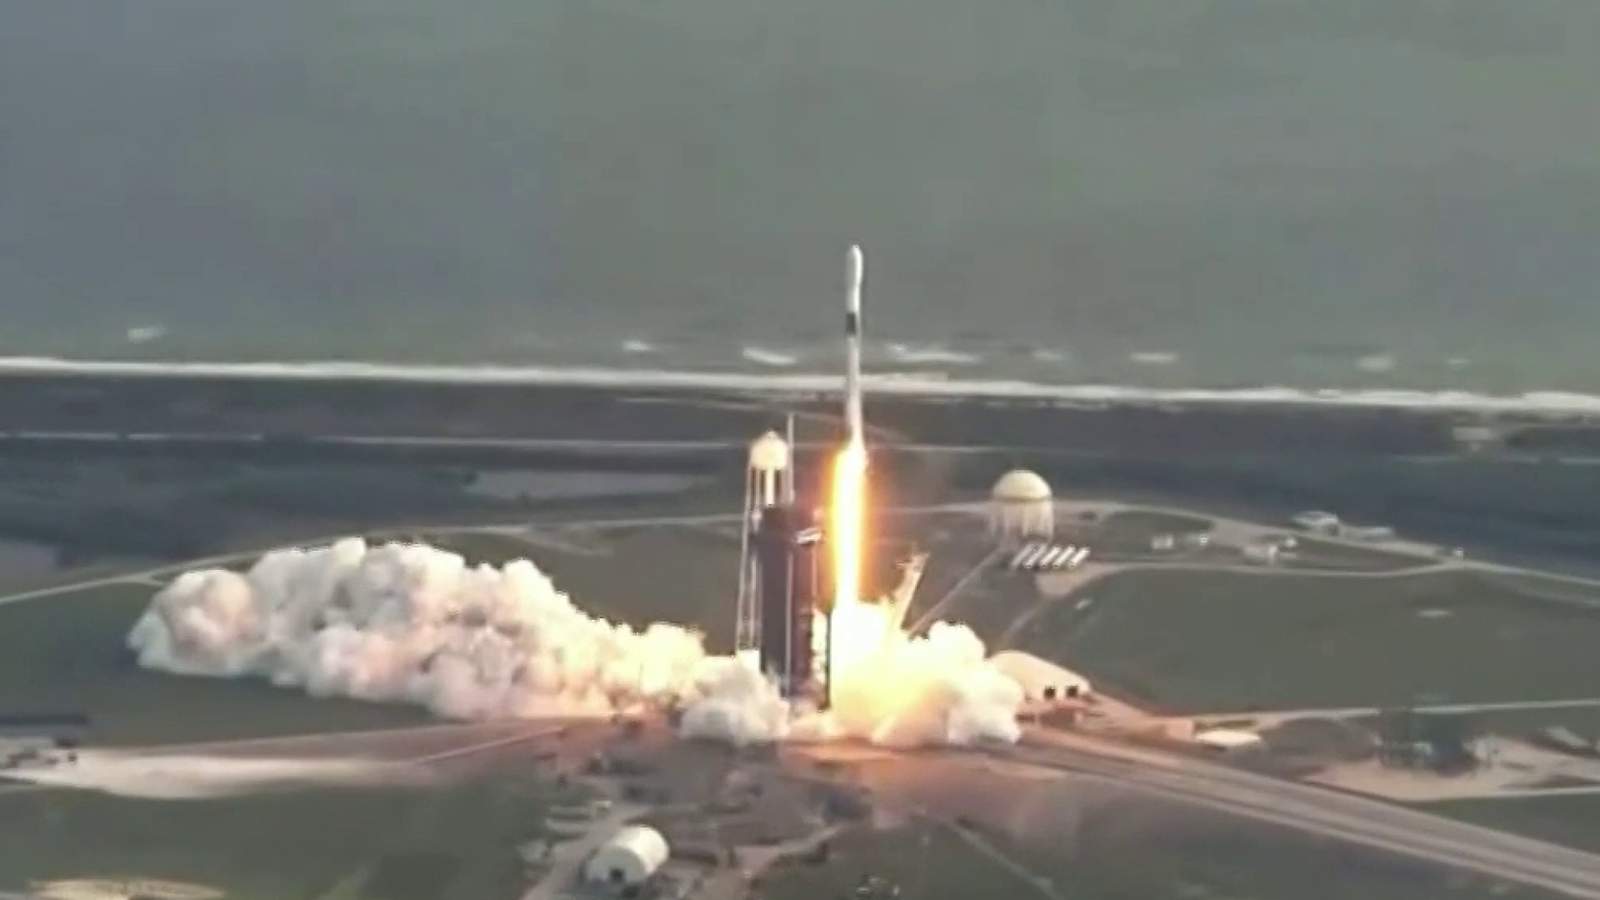 The launch of SpaceX Falcon 9 on the Turkish satellite from Cape Canaveral